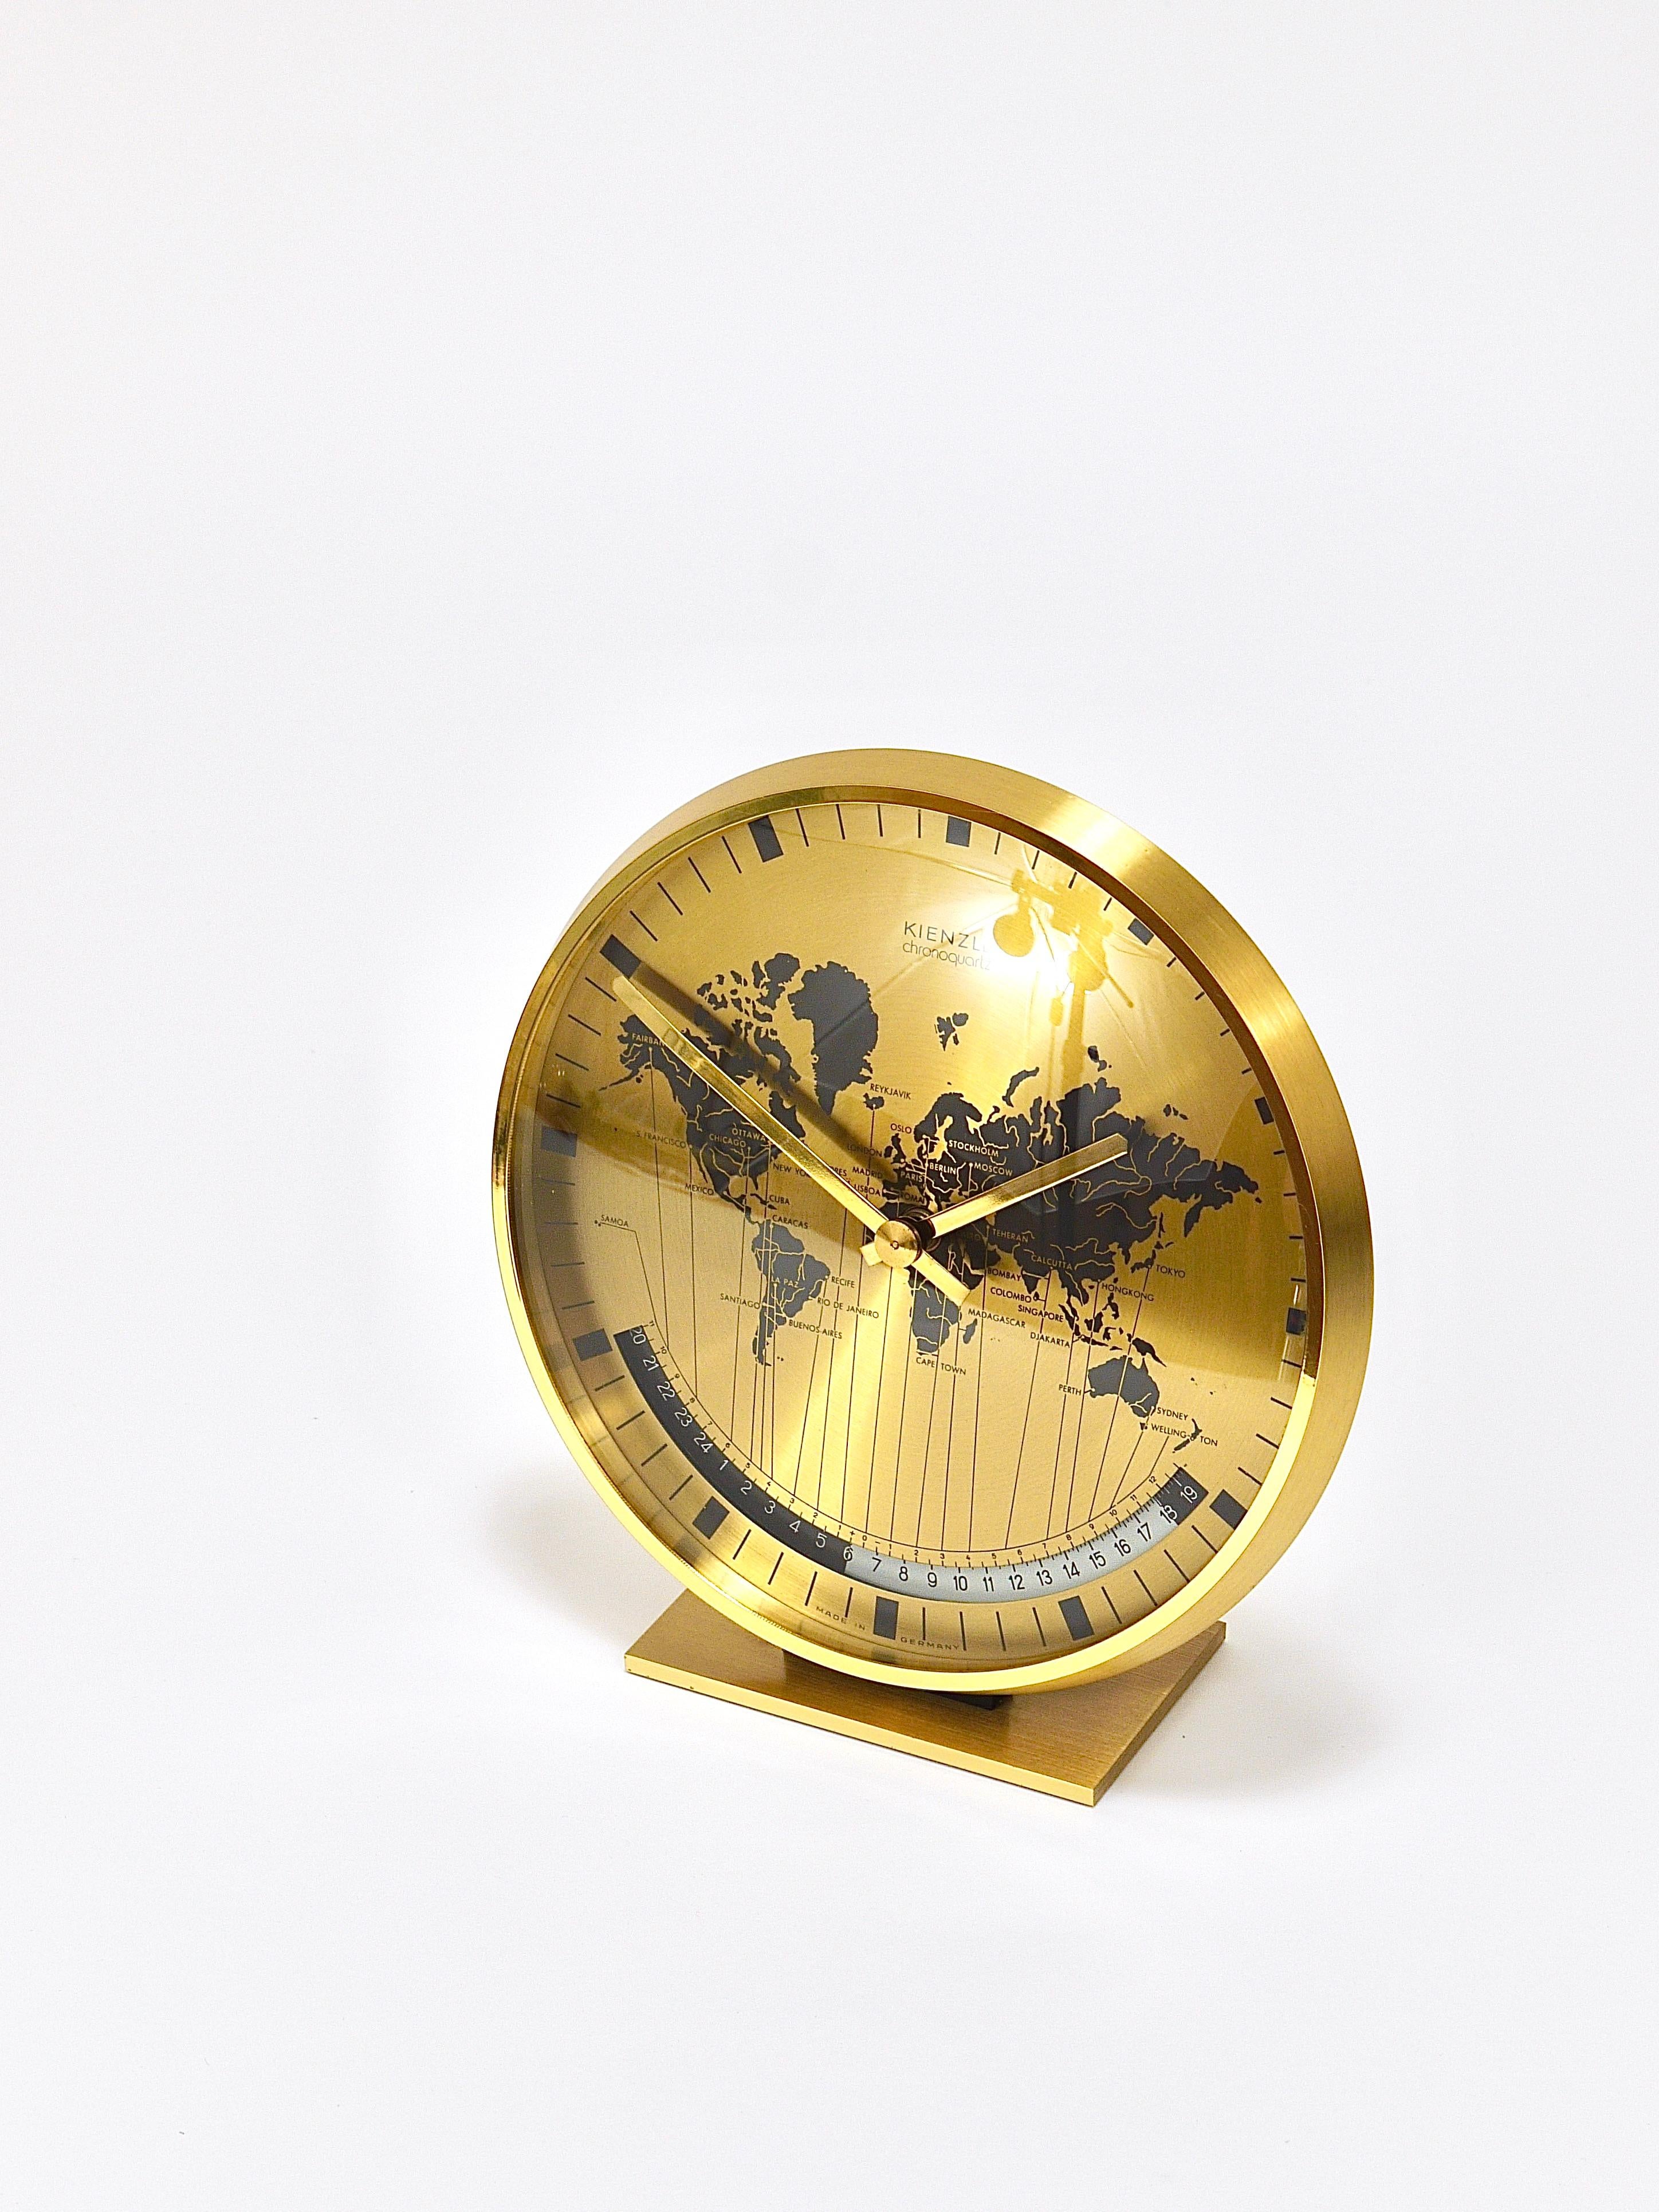 Kienzle GMT World Time Zone Brass Table Clock, Midcentury, Germany, 1960s For Sale 4